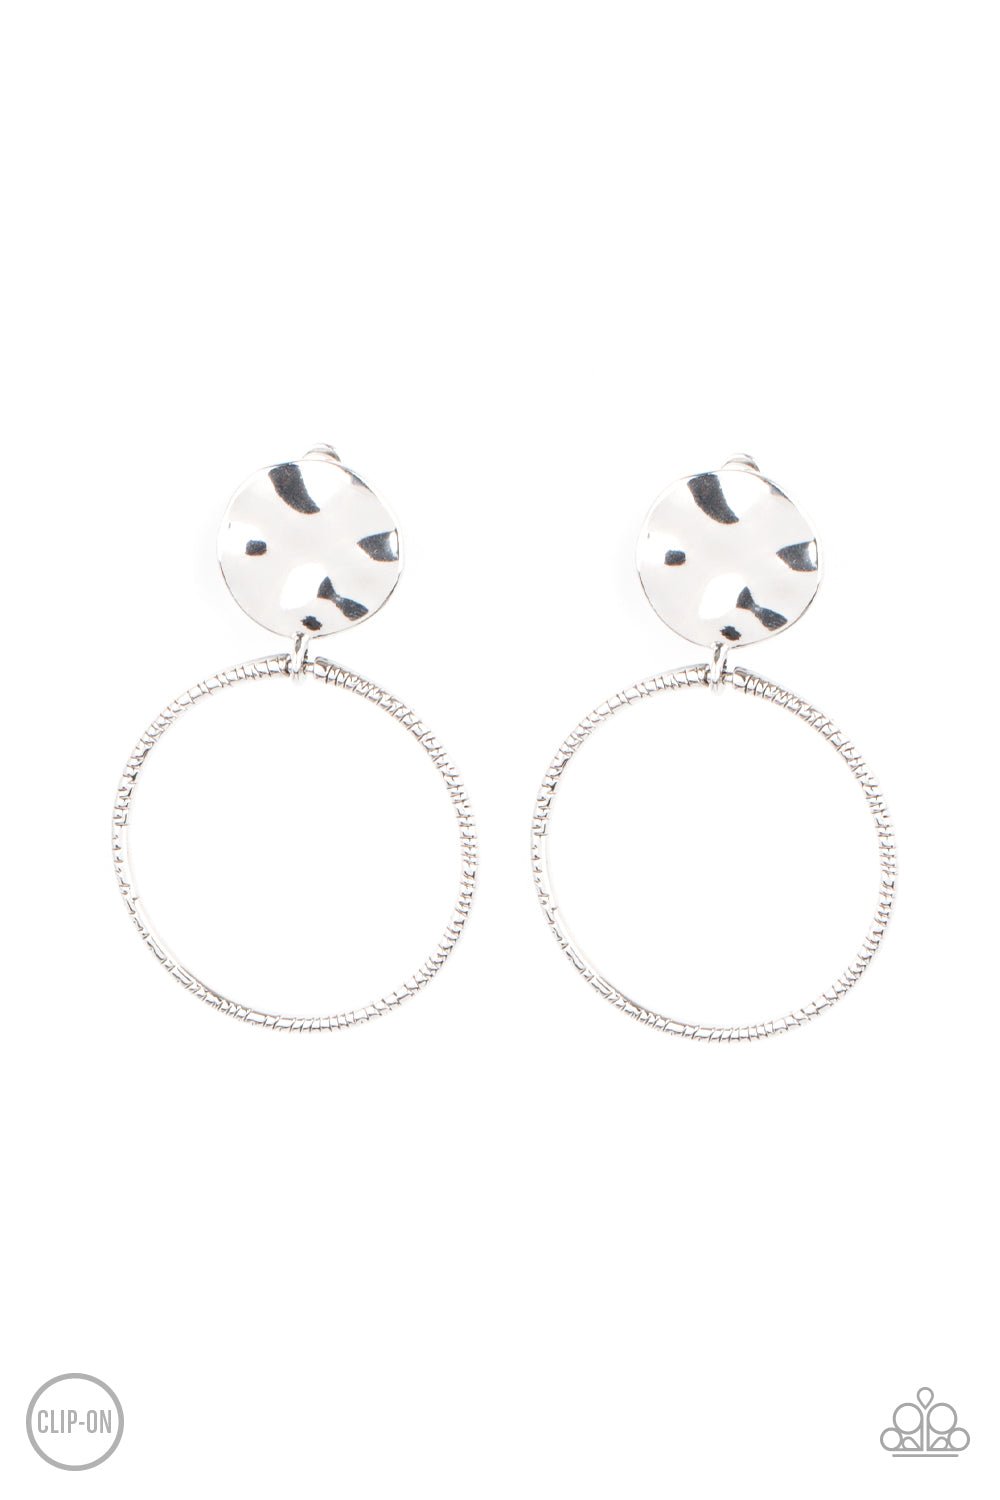 Undeniably Urban Silver Paparazzi Clip-On Earrings Cashmere Pink Jewels